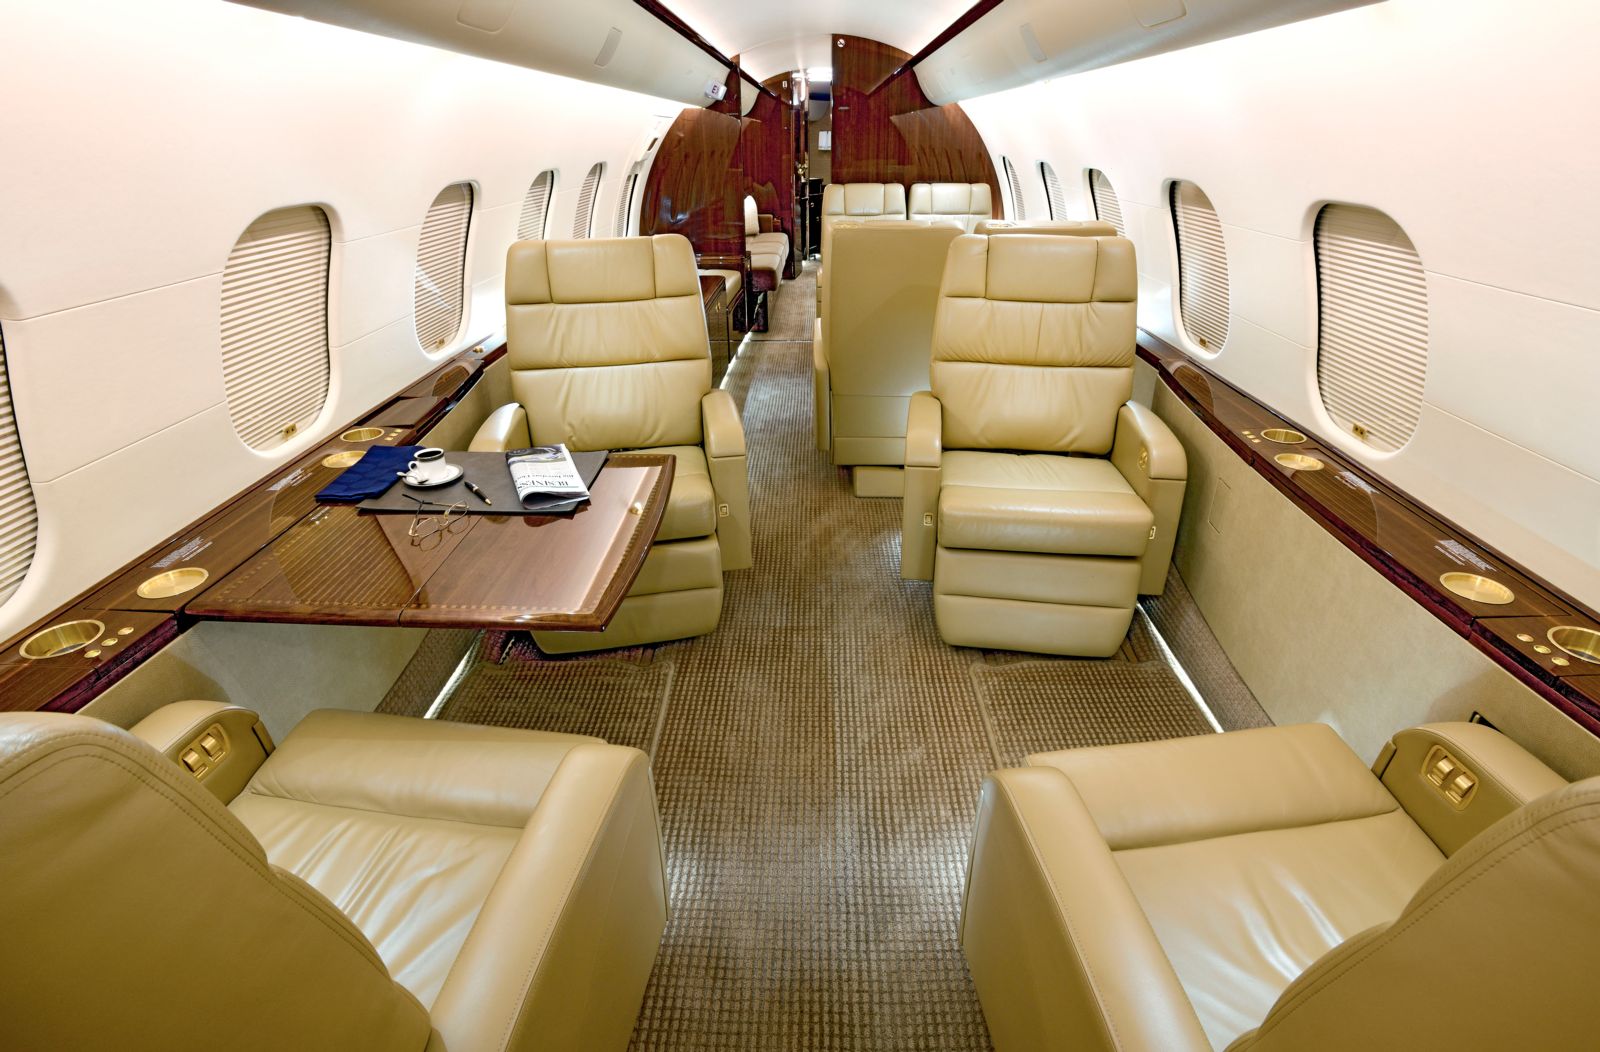 Bombardier Global 5000  S/N 9366 for sale | gallery image: /userfiles/images/G5000_sn9366/fwd%20aft.jpg